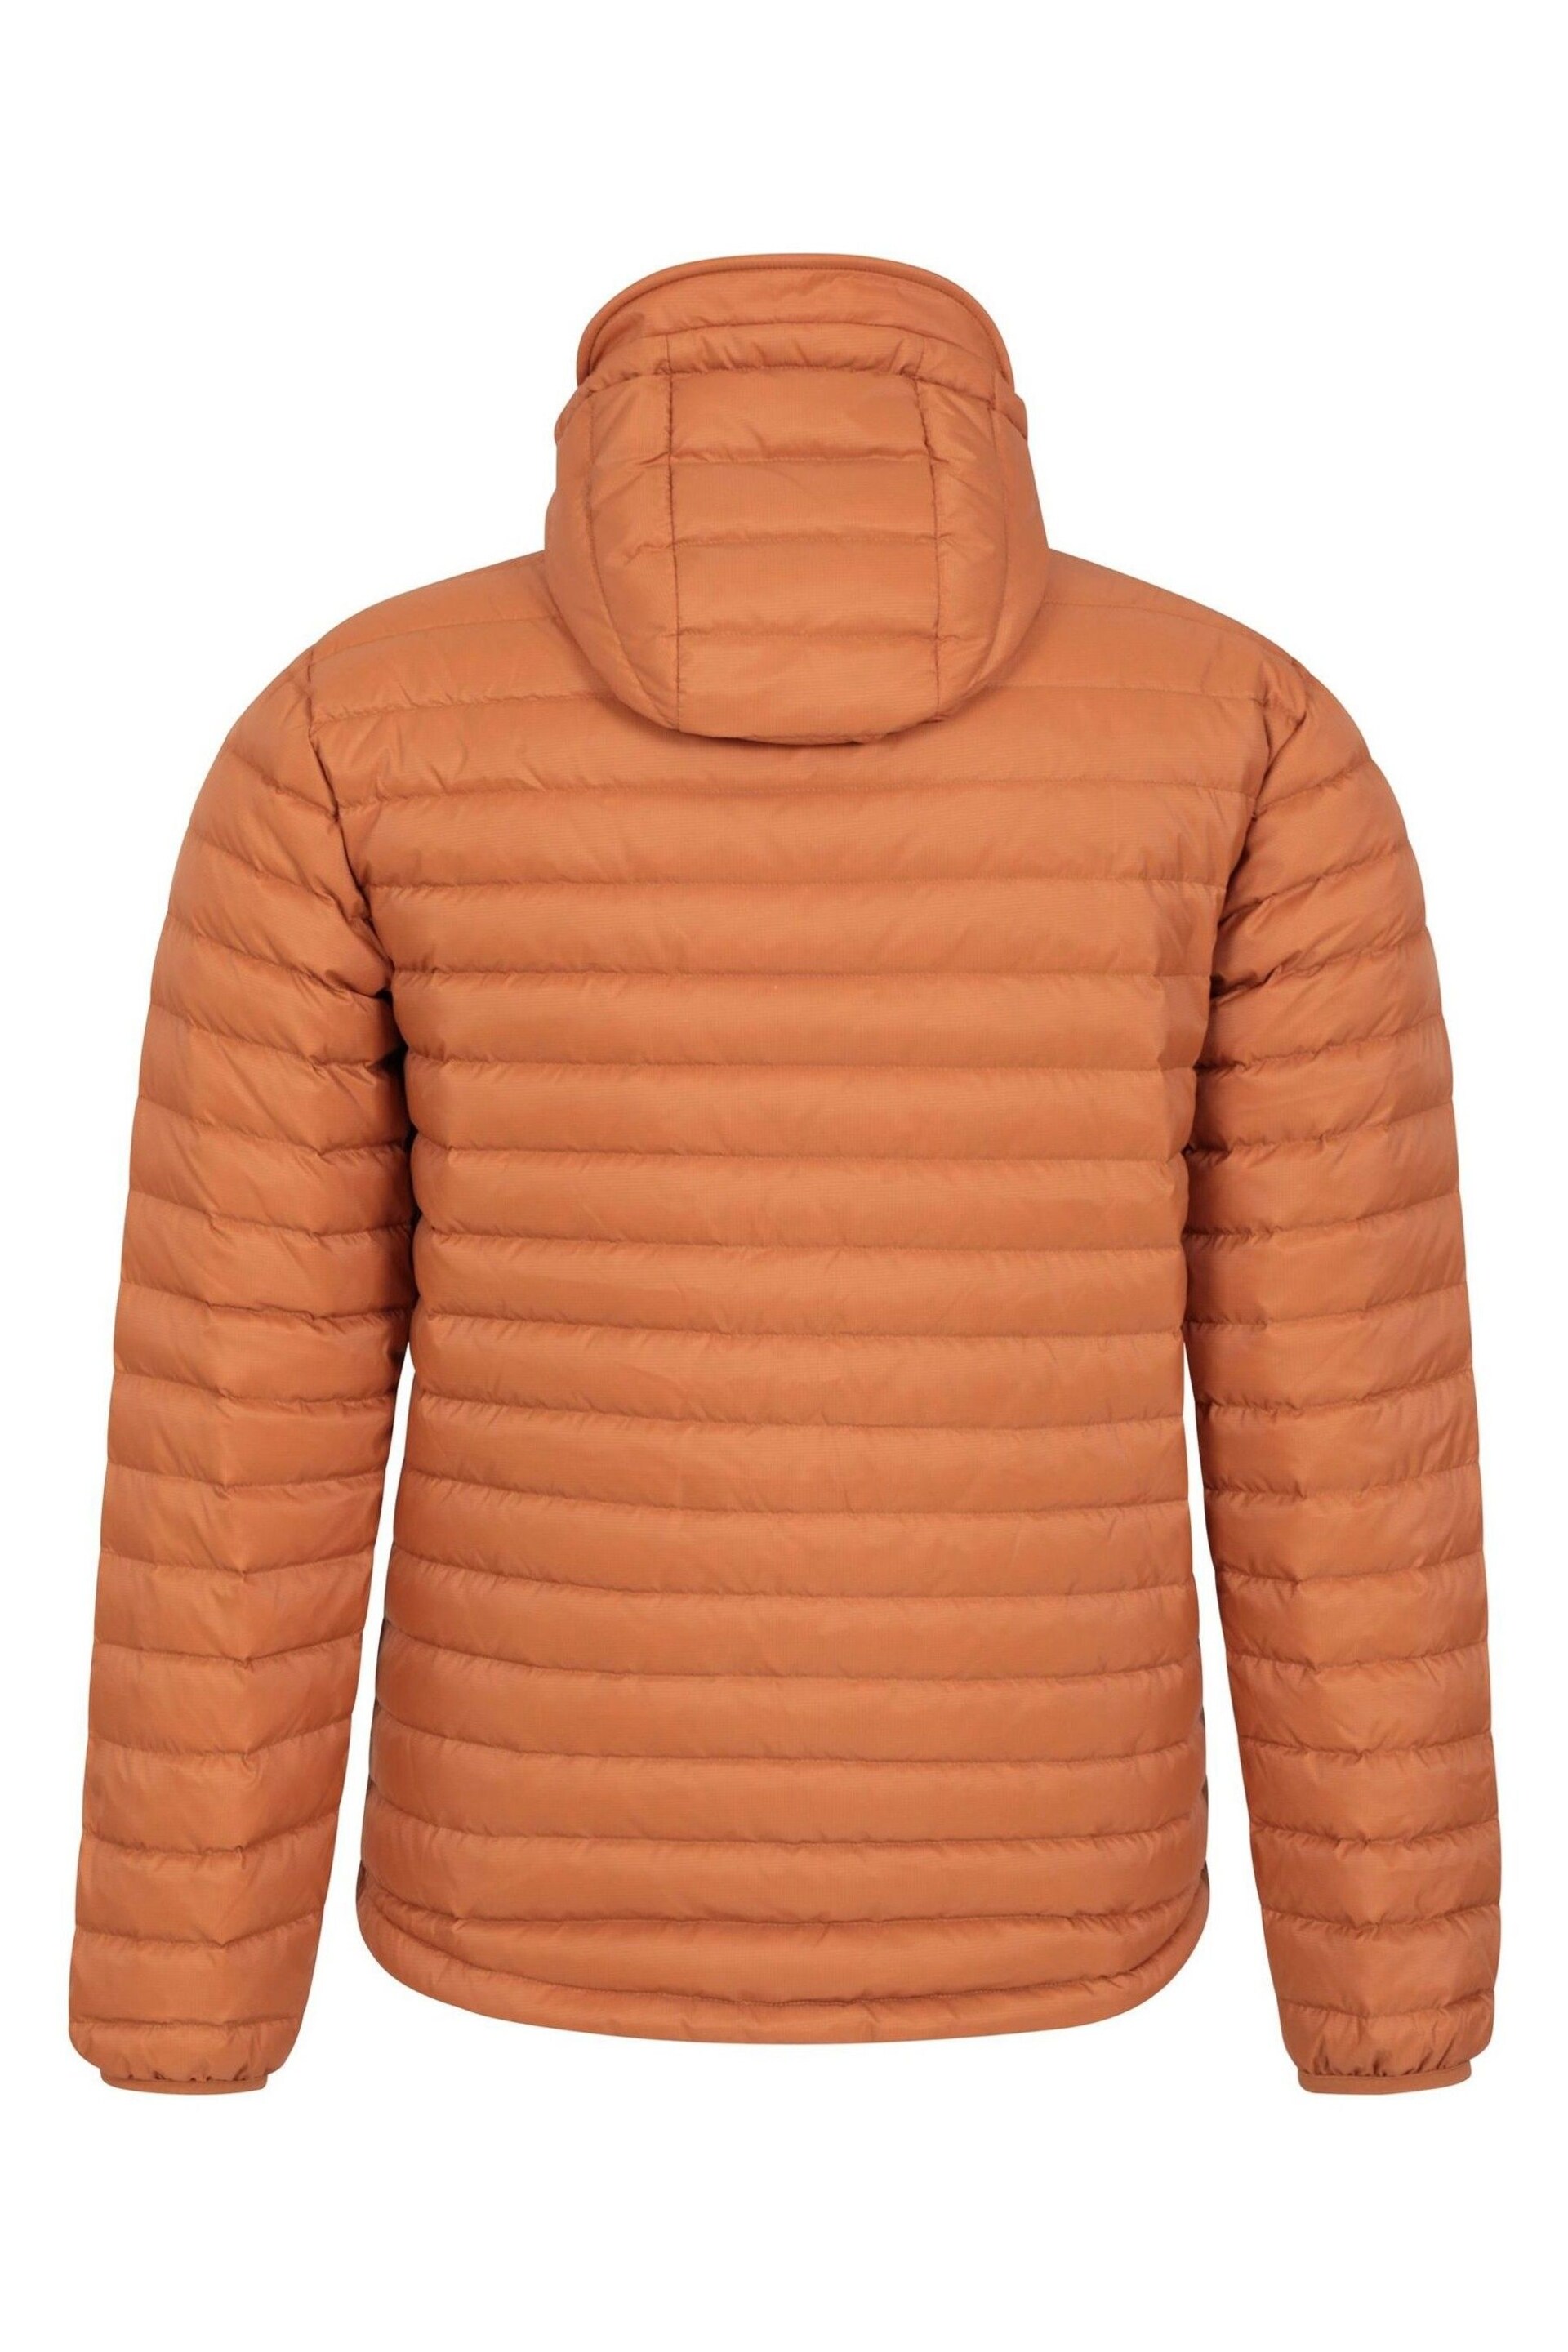 Mountain Warehouse Orange Mens Henry II Extreme Water Resistant Down Padded Jacket - Image 3 of 6